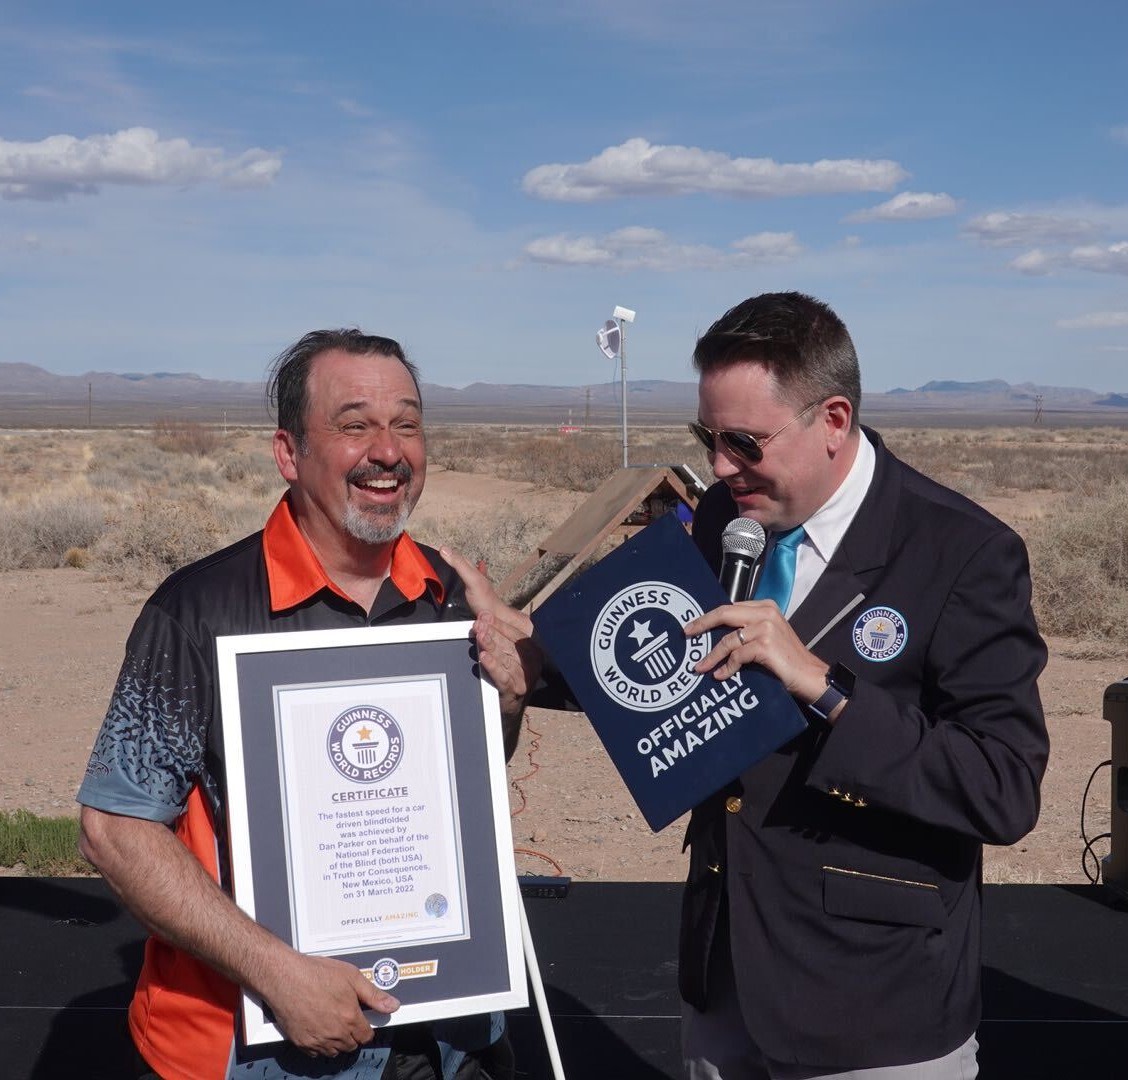 Dan Parker with Guinness book of world records certificate